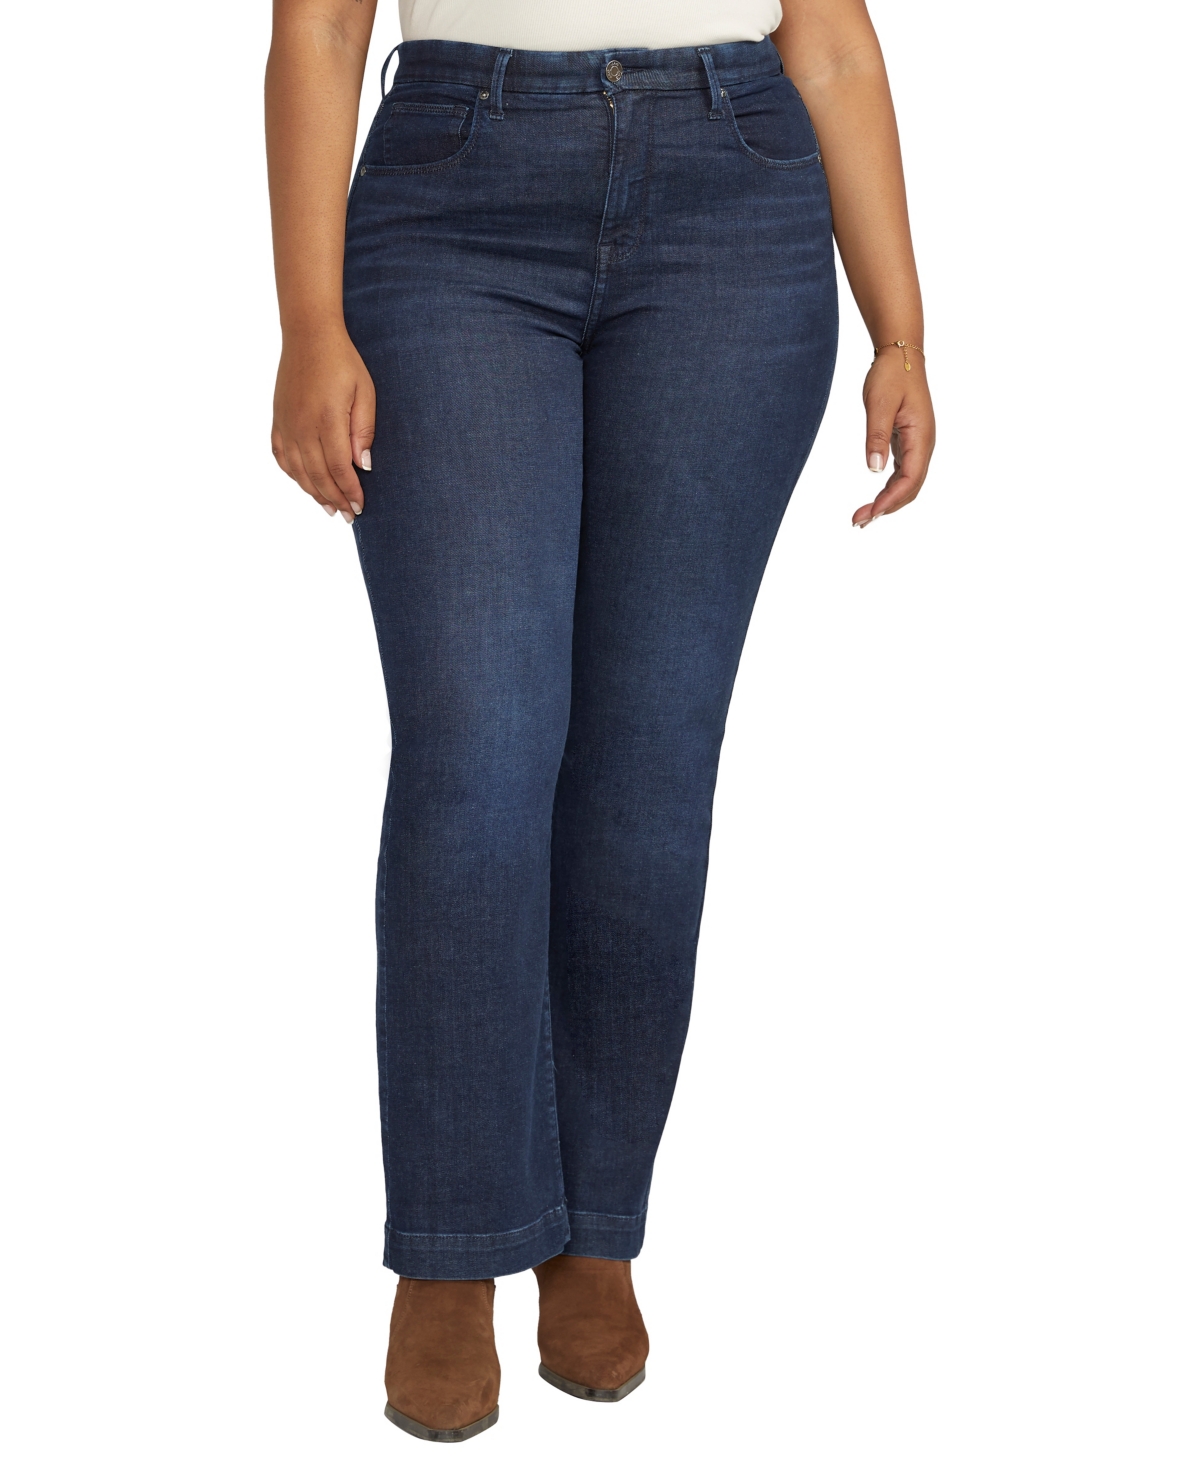 Plus Size Phoebe High Rise Bootcut Jeans - Stardust